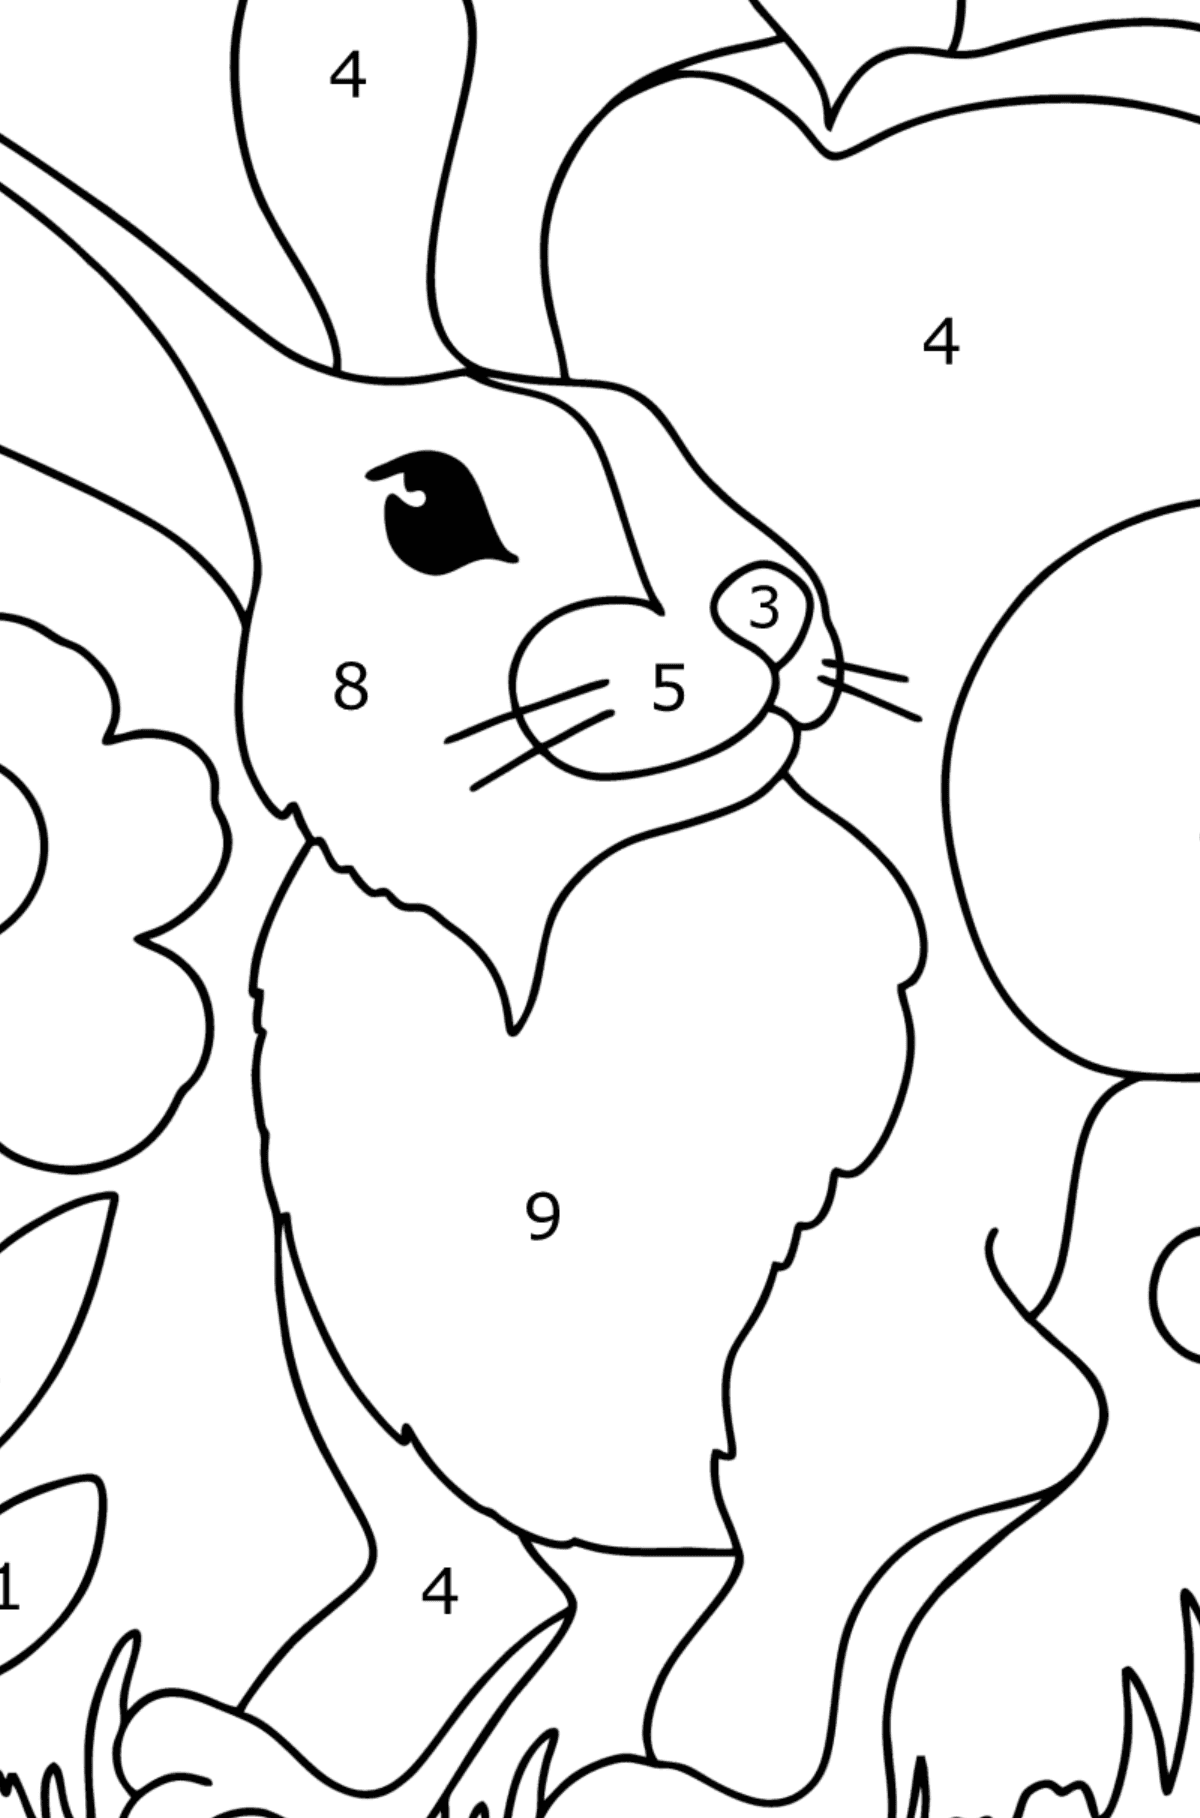 Cute Rabbit coloring page - Coloring by Numbers for Kids